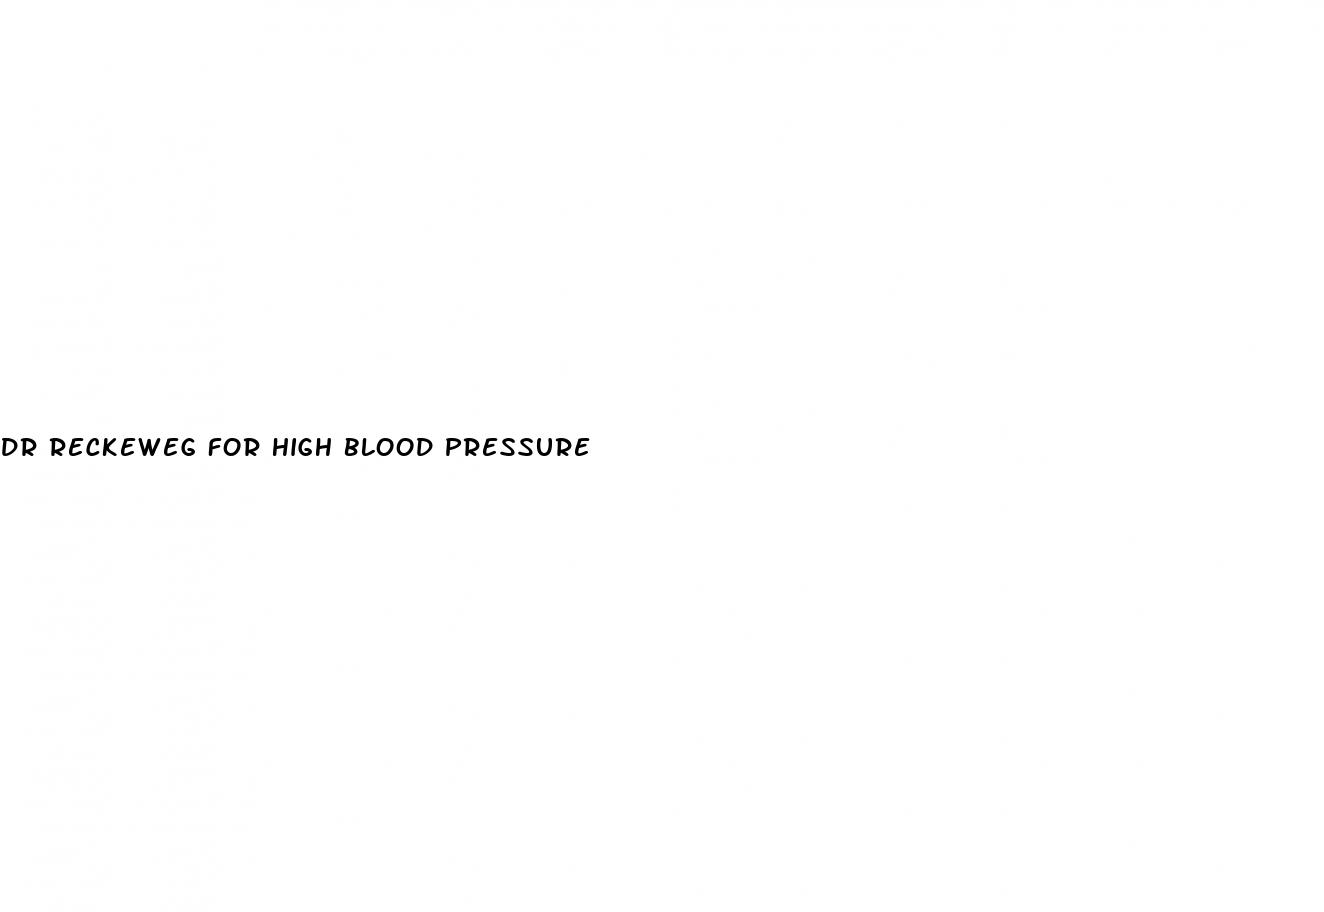 dr reckeweg for high blood pressure